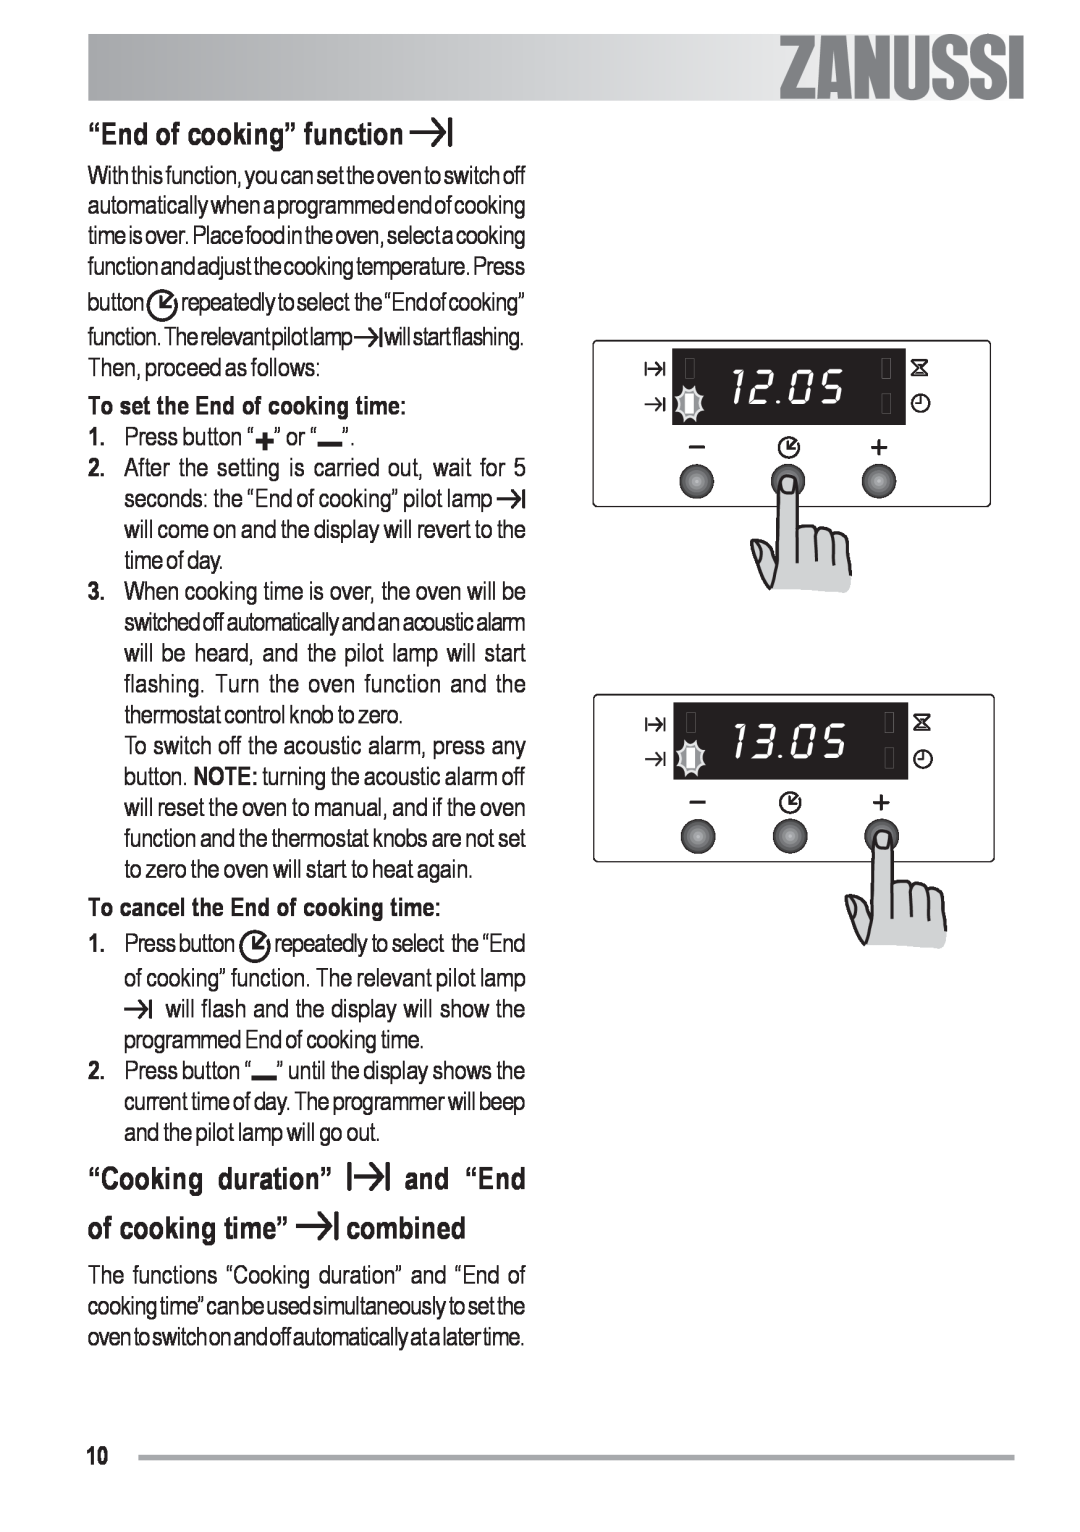 Zanussi ZOB 330 manual “End of cooking” function, “Cooking duration” and “End of cooking time” combined, Press button 